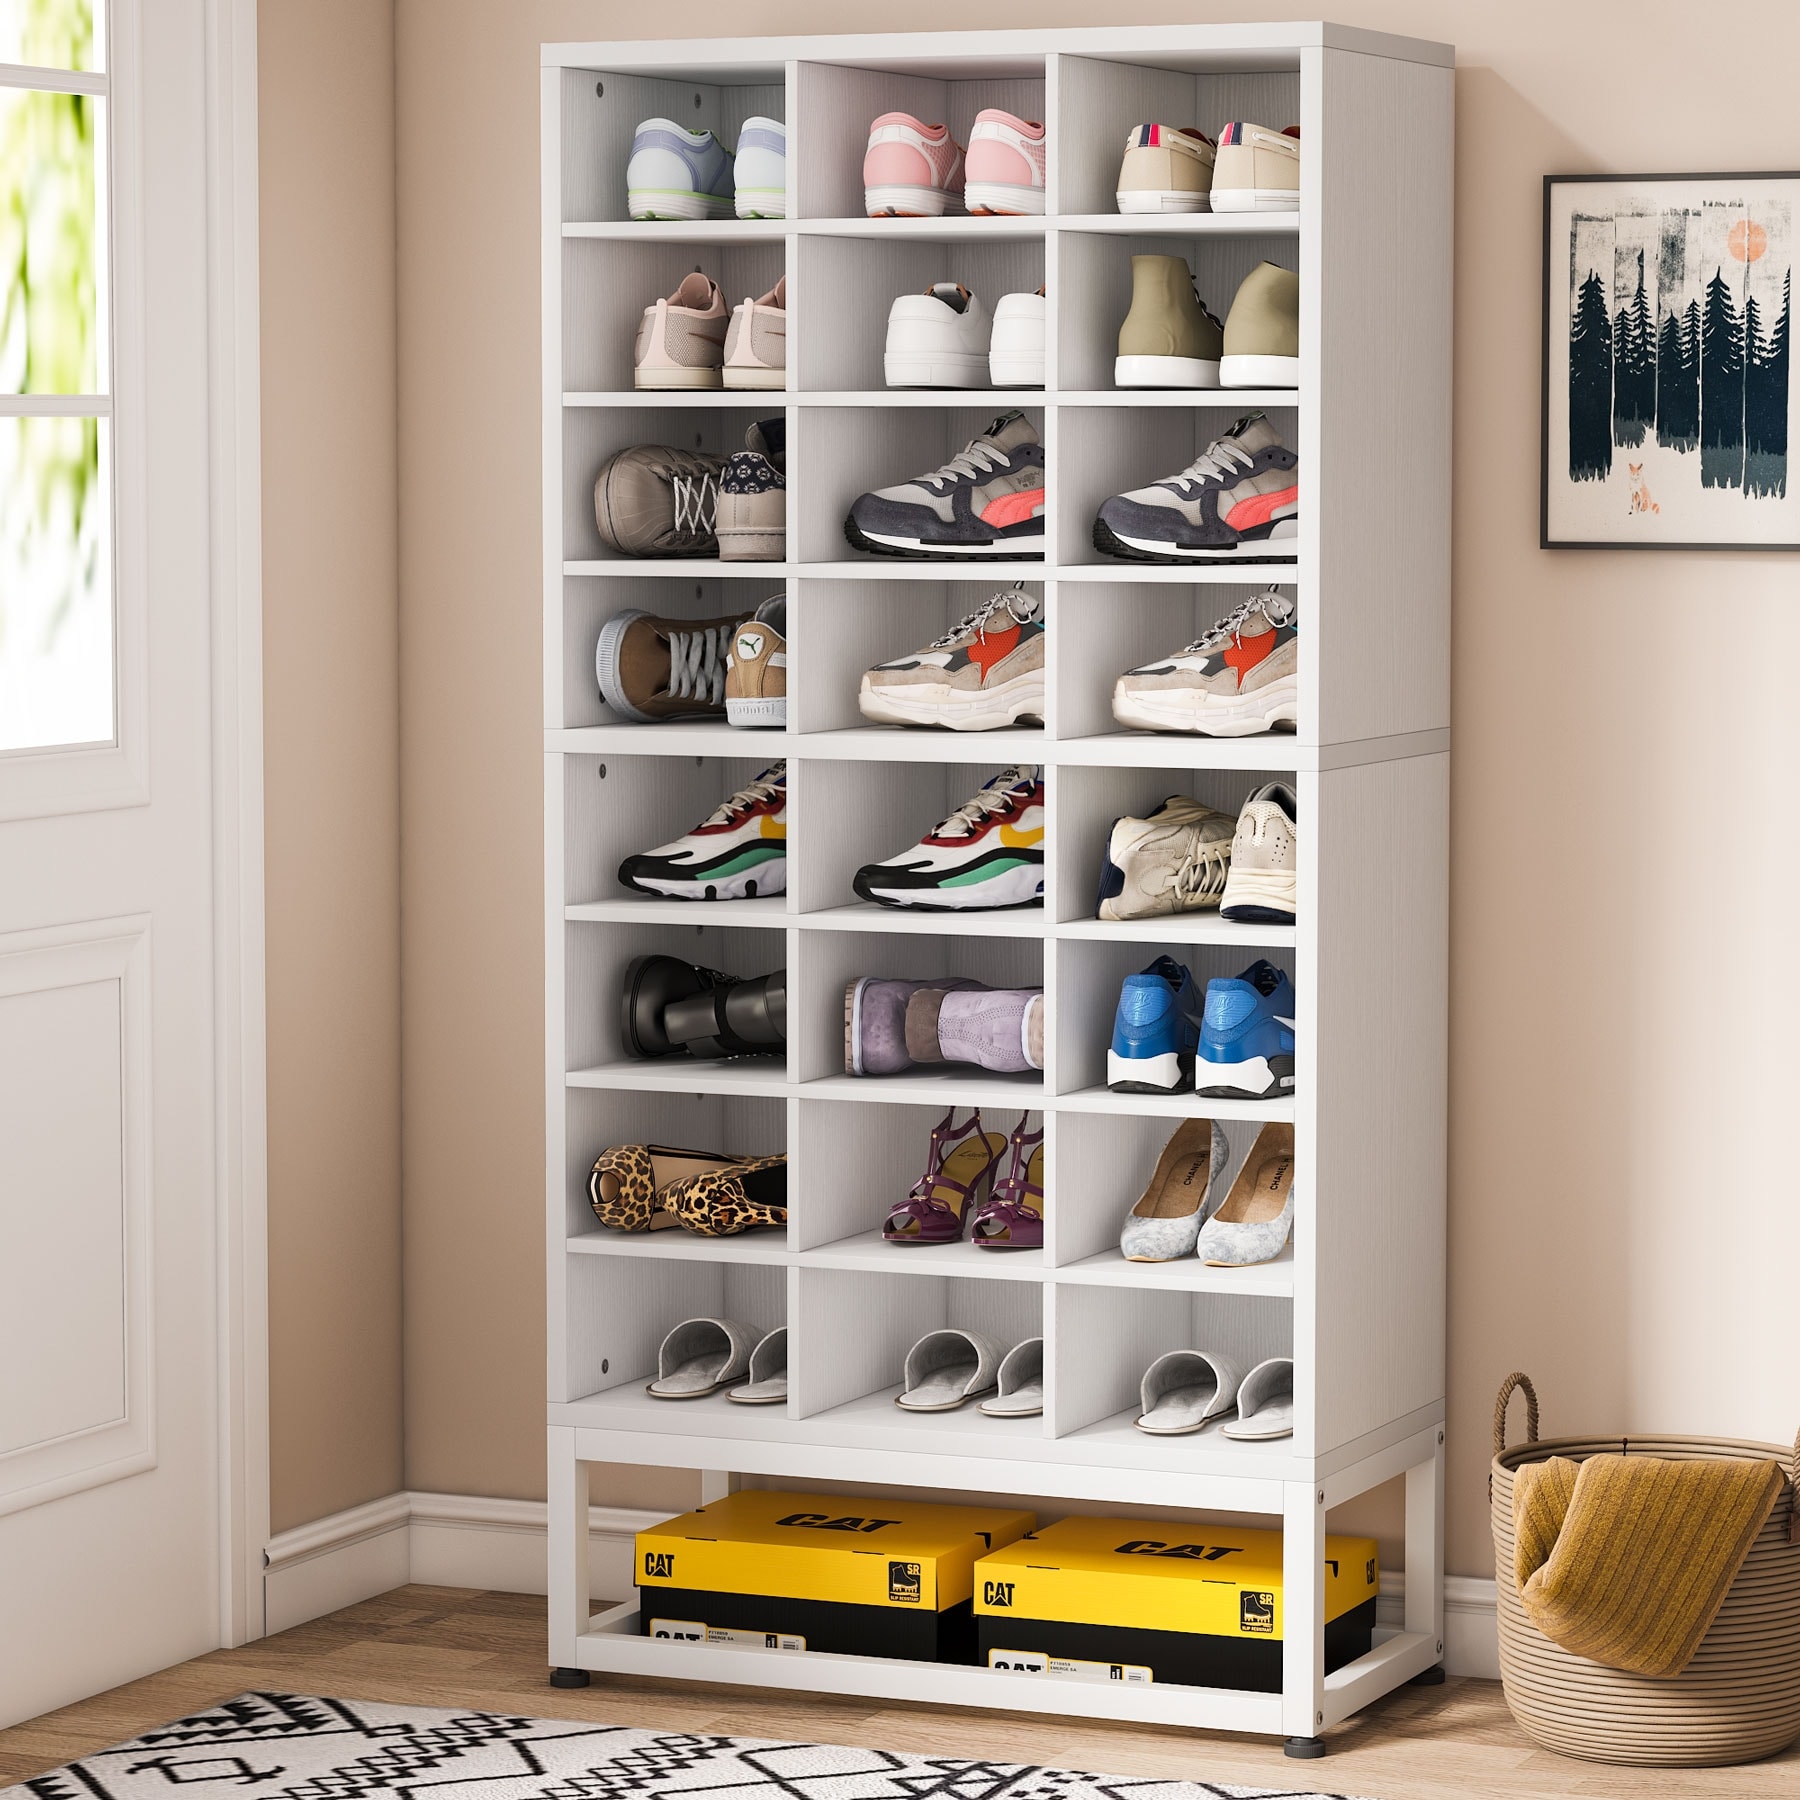 https://ak1.ostkcdn.com/images/products/is/images/direct/ae7d106c8f07dcb29e40c1ecf367fb06670c51c9/Tall-Shoe-Storage%2C-24-Cubby-Cabinet%2C-White.jpg